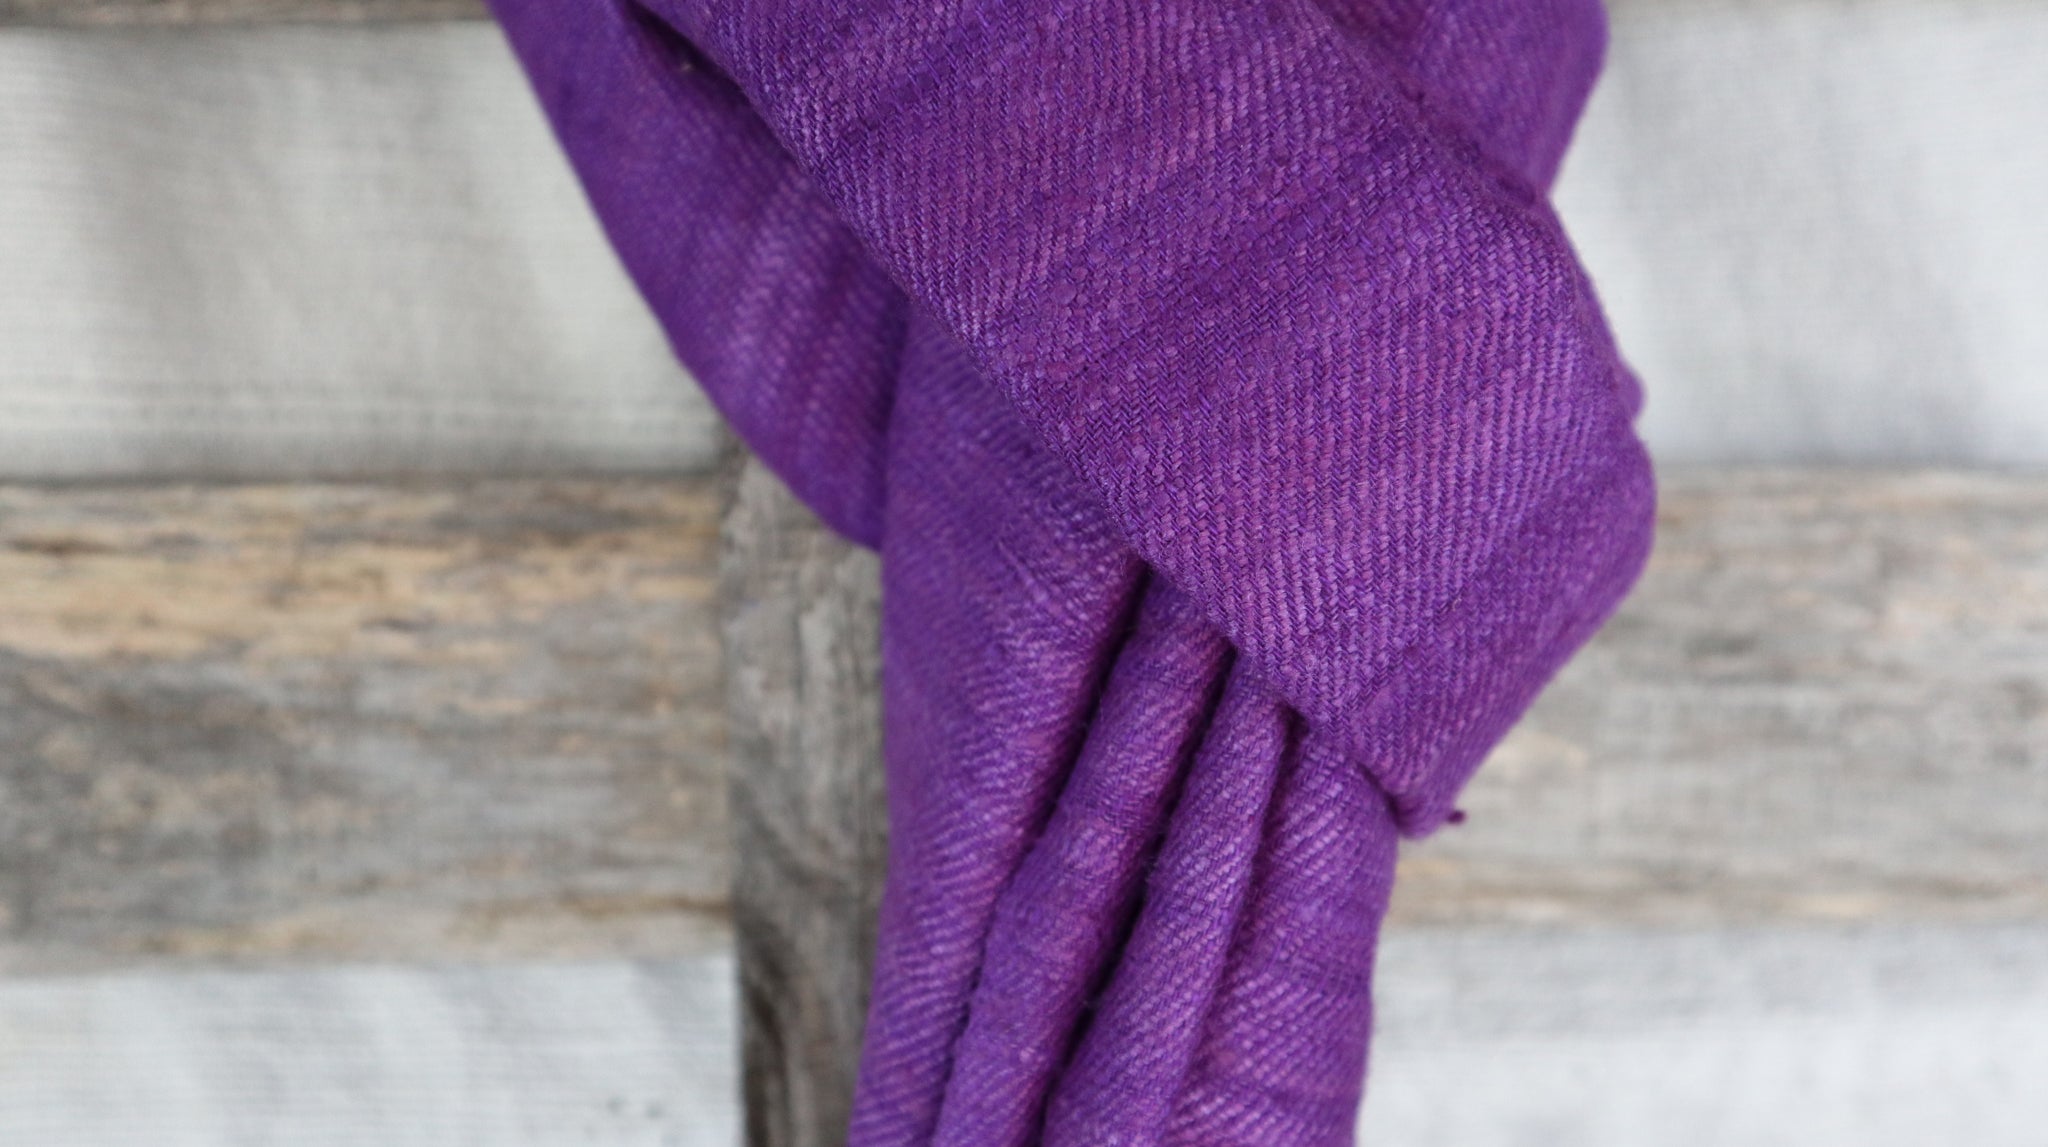 detail of the natural fibers of the raw silk from the purple scarf 